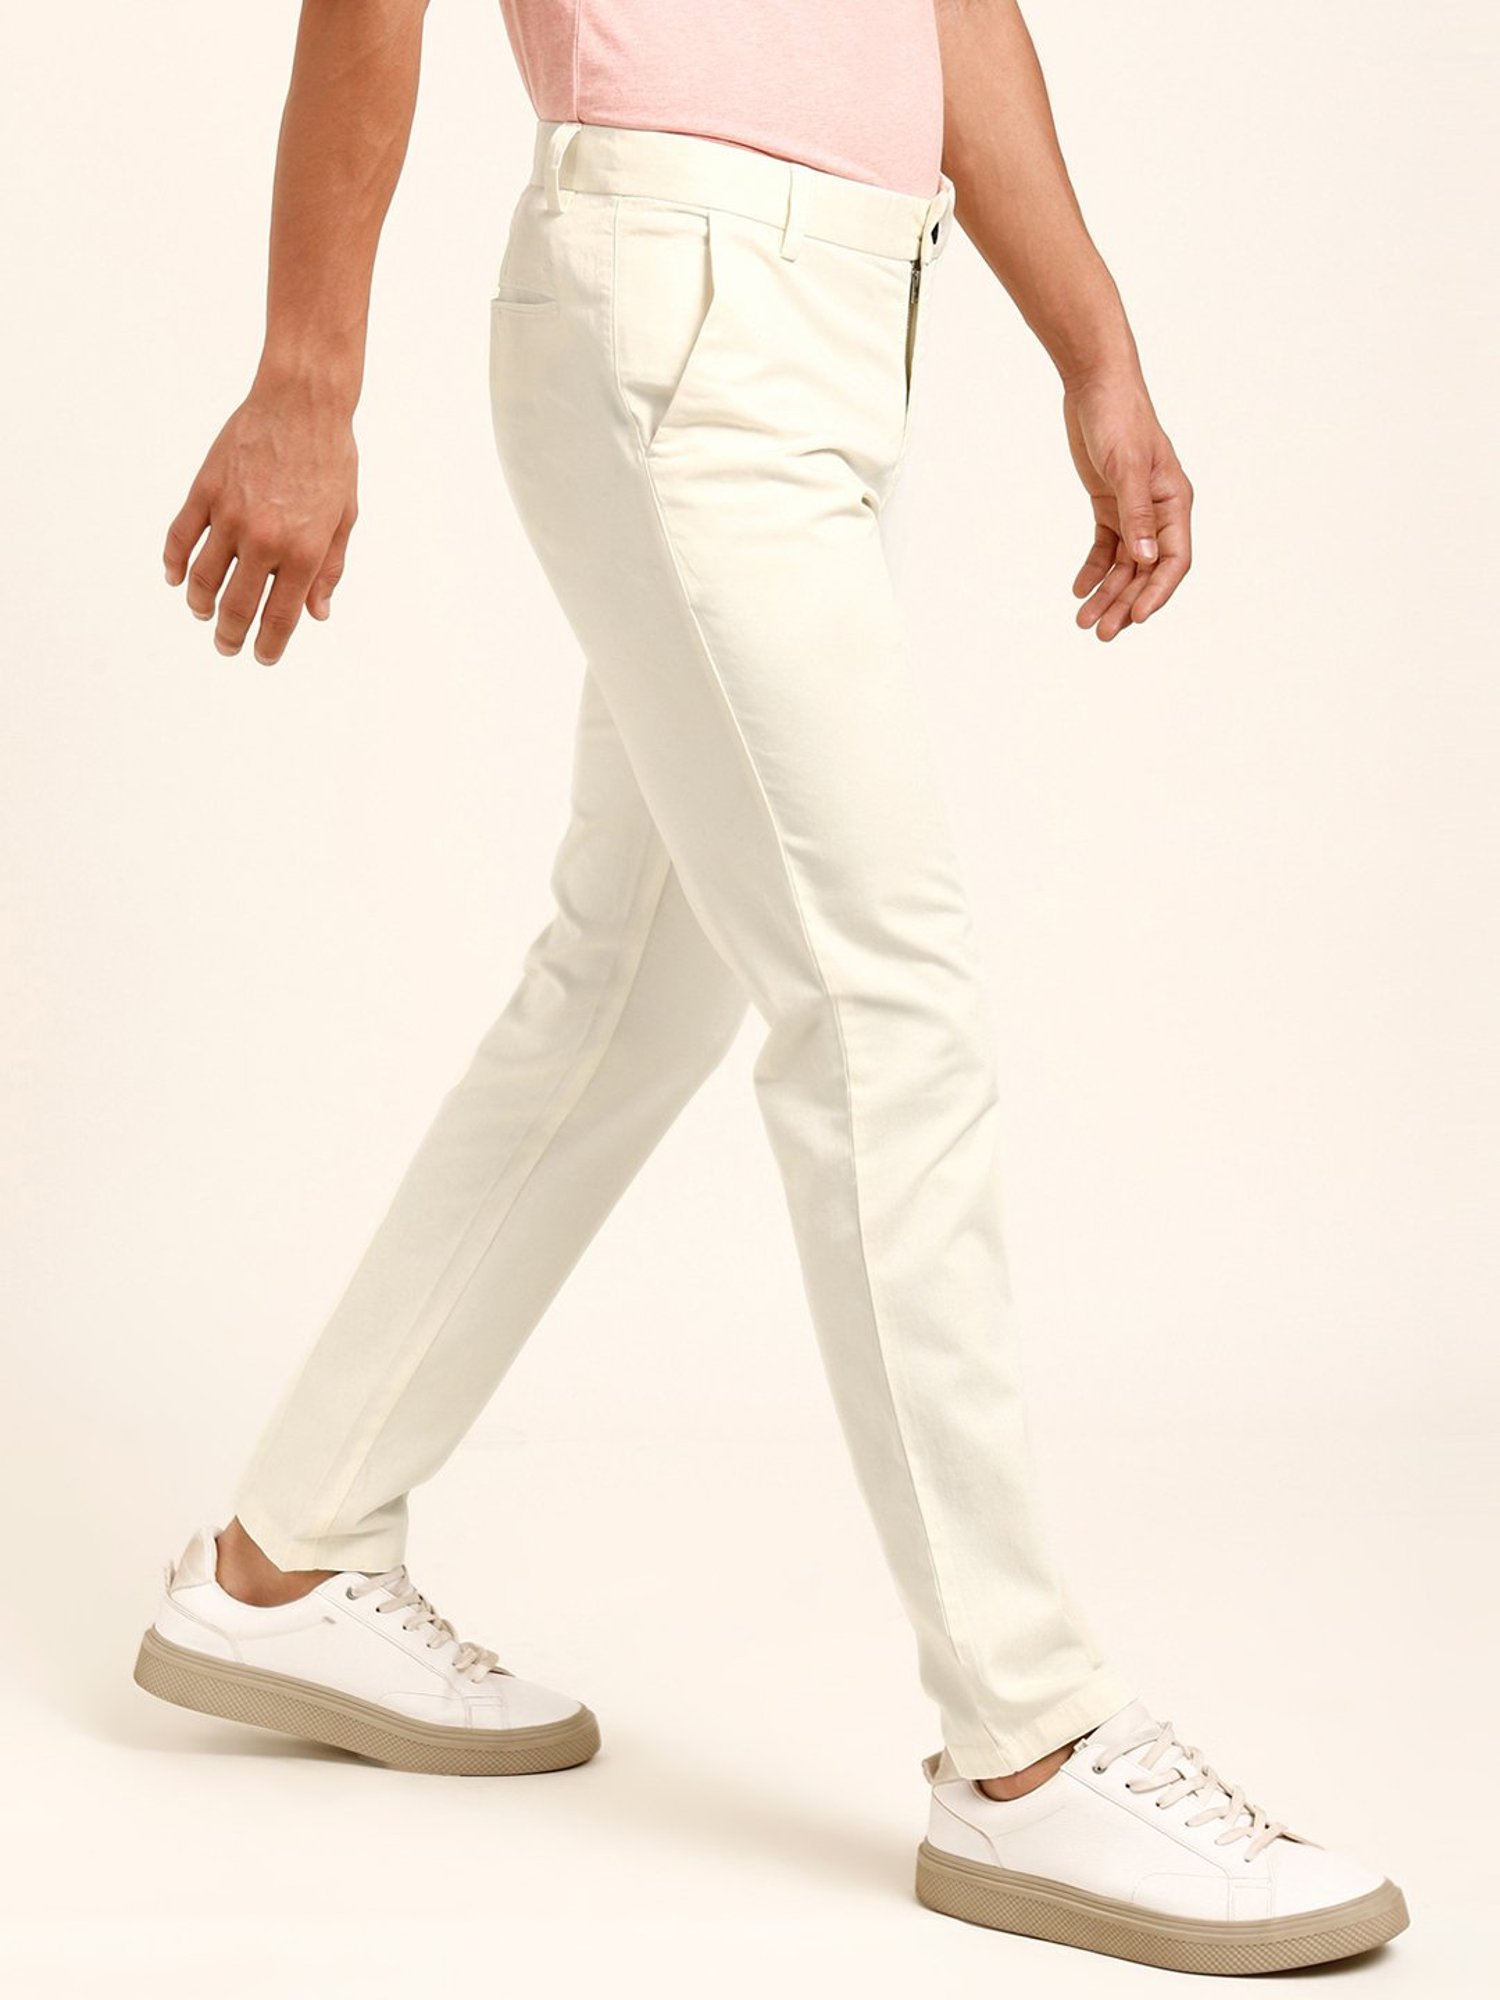 How To Wear It: White Pants / Chinos